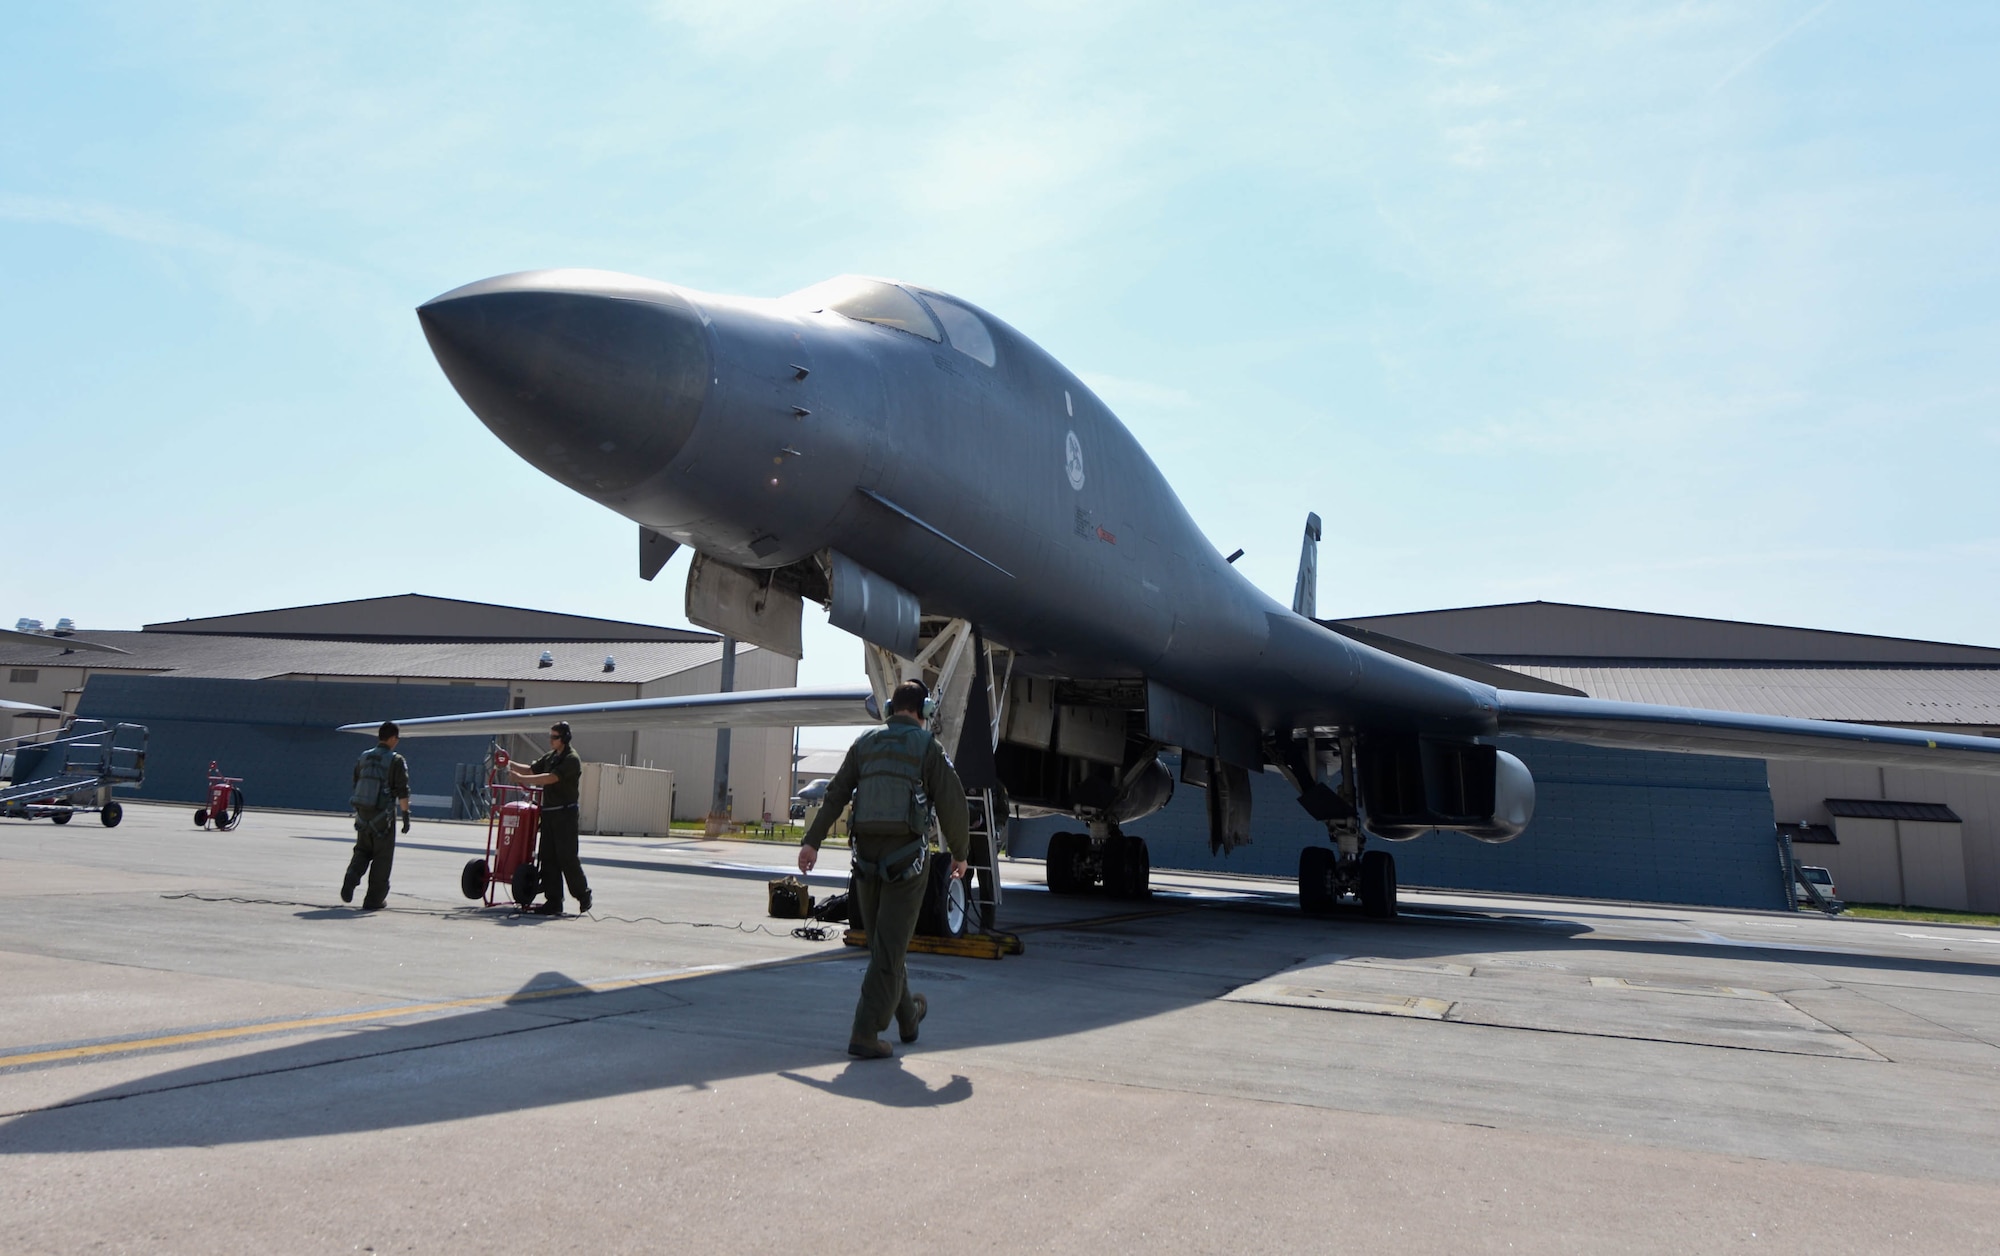 Aircrew members assigned to the 34th Bomb Squadron perform preflight checks of a B-1B Lancer bomber as part of a standoff weapons integration exercise Aug. 13, 2014, at Ellsworth Air Force Base, S.D. The exercise was developed by B-1 aviators, and B-52 Stratofortress bomber crews assigned to the 23rd Bomb Squadron, Minot AFB, N.D., to create an integrated mission plan involving simulated tactical scenarios to train for potential future operations. (U.S. Air Force photo/Senior Airman Zachary Hada)